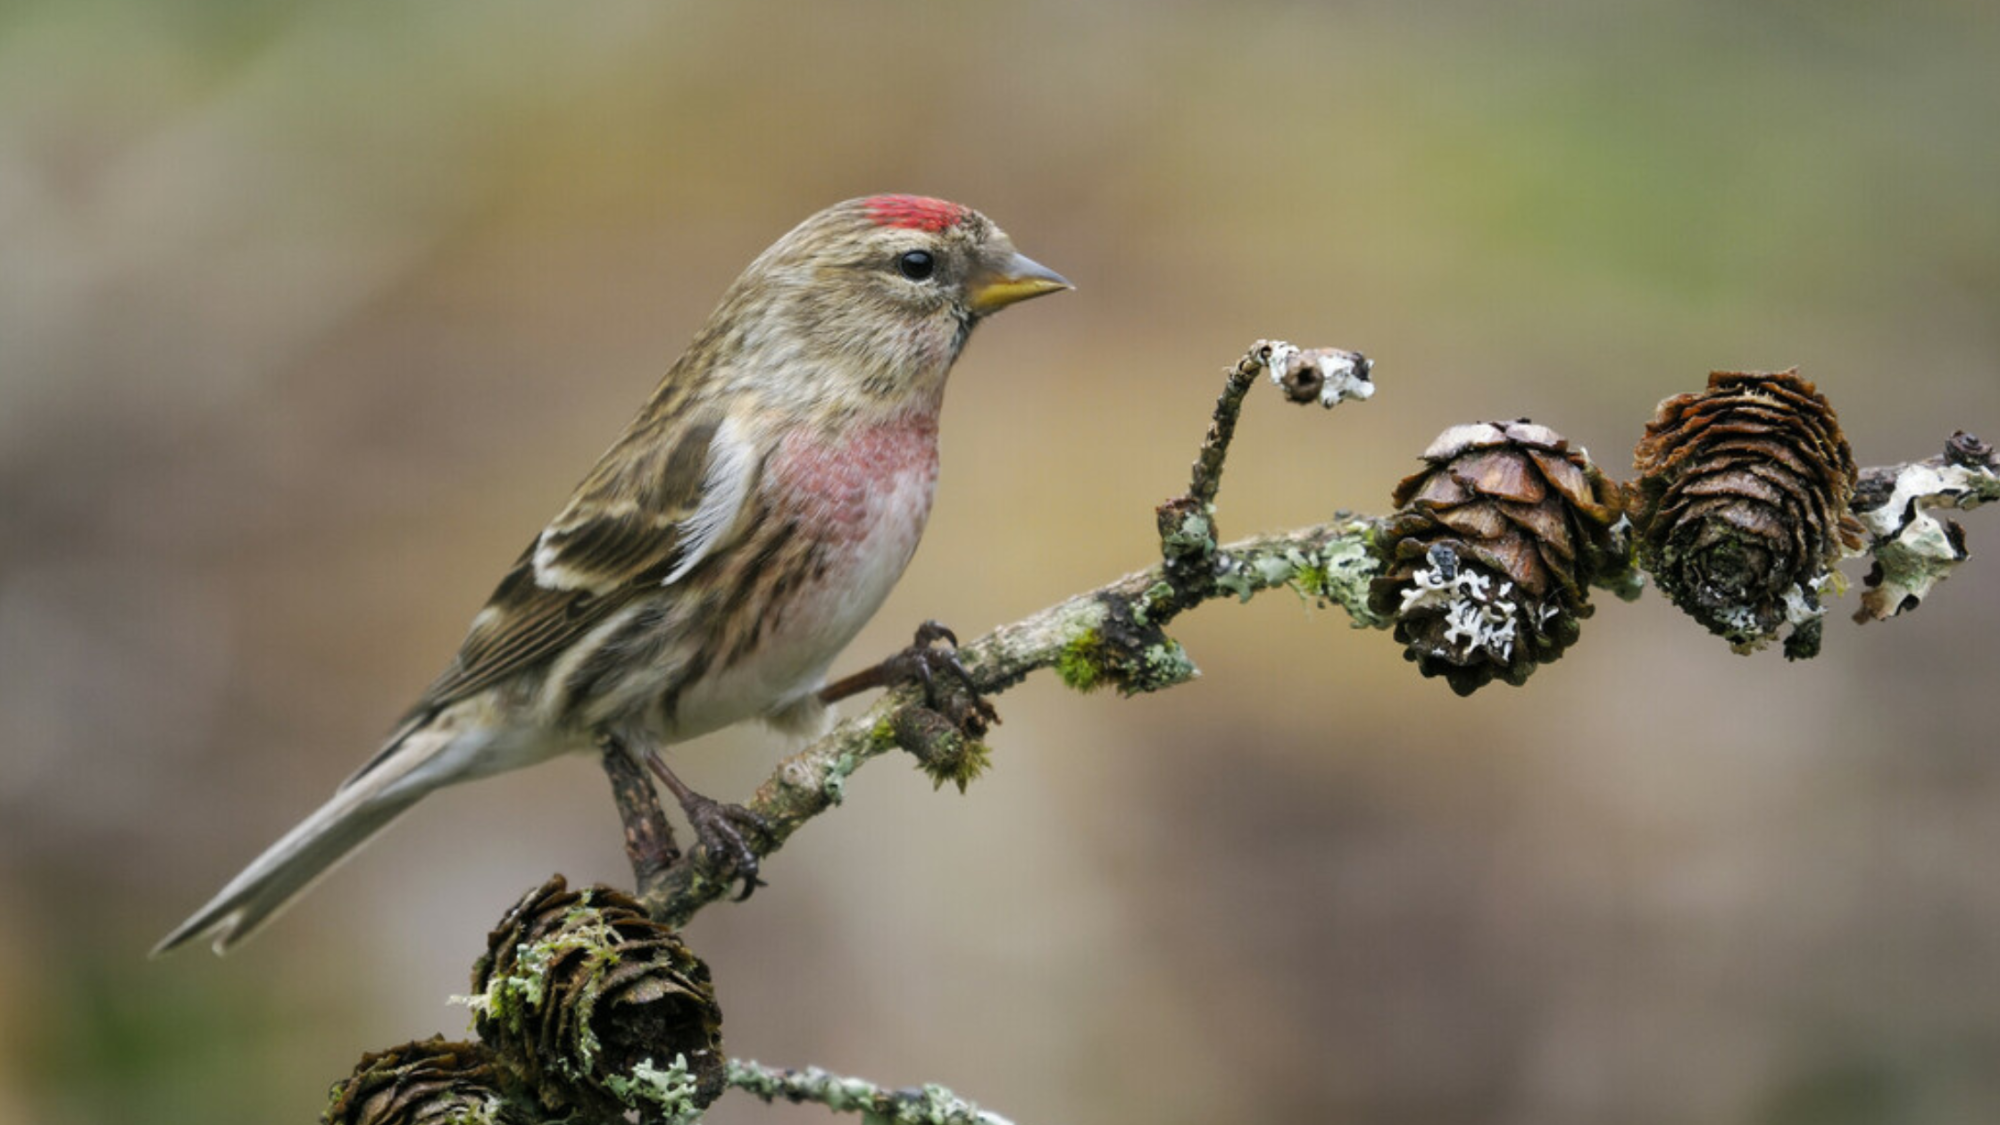 A lesser redpoll on a branch